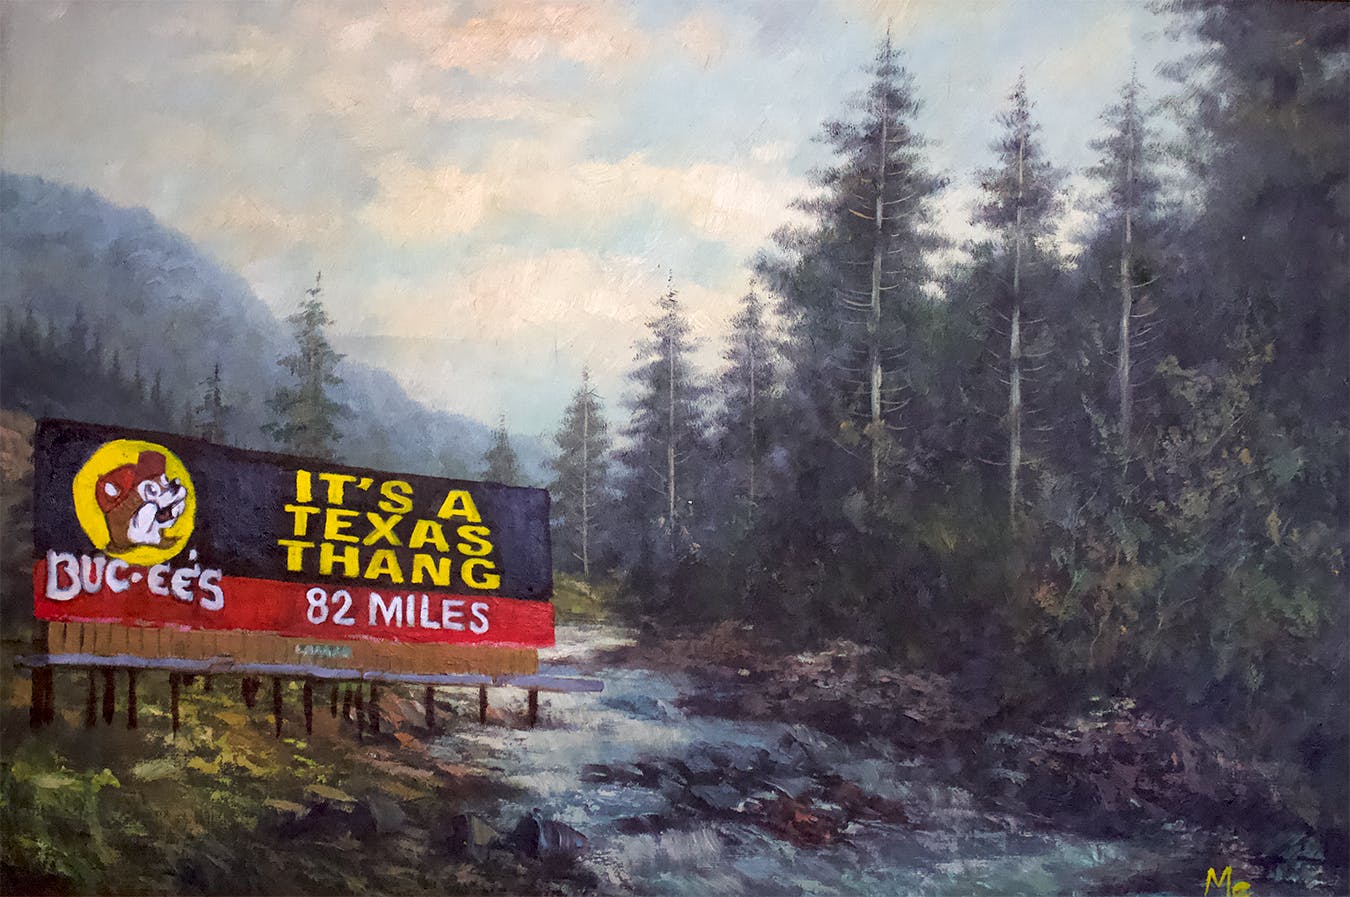 Painting of a billboard that says, "Bucees, Its a Texas Thang" next to a waterfall and pine trees. 